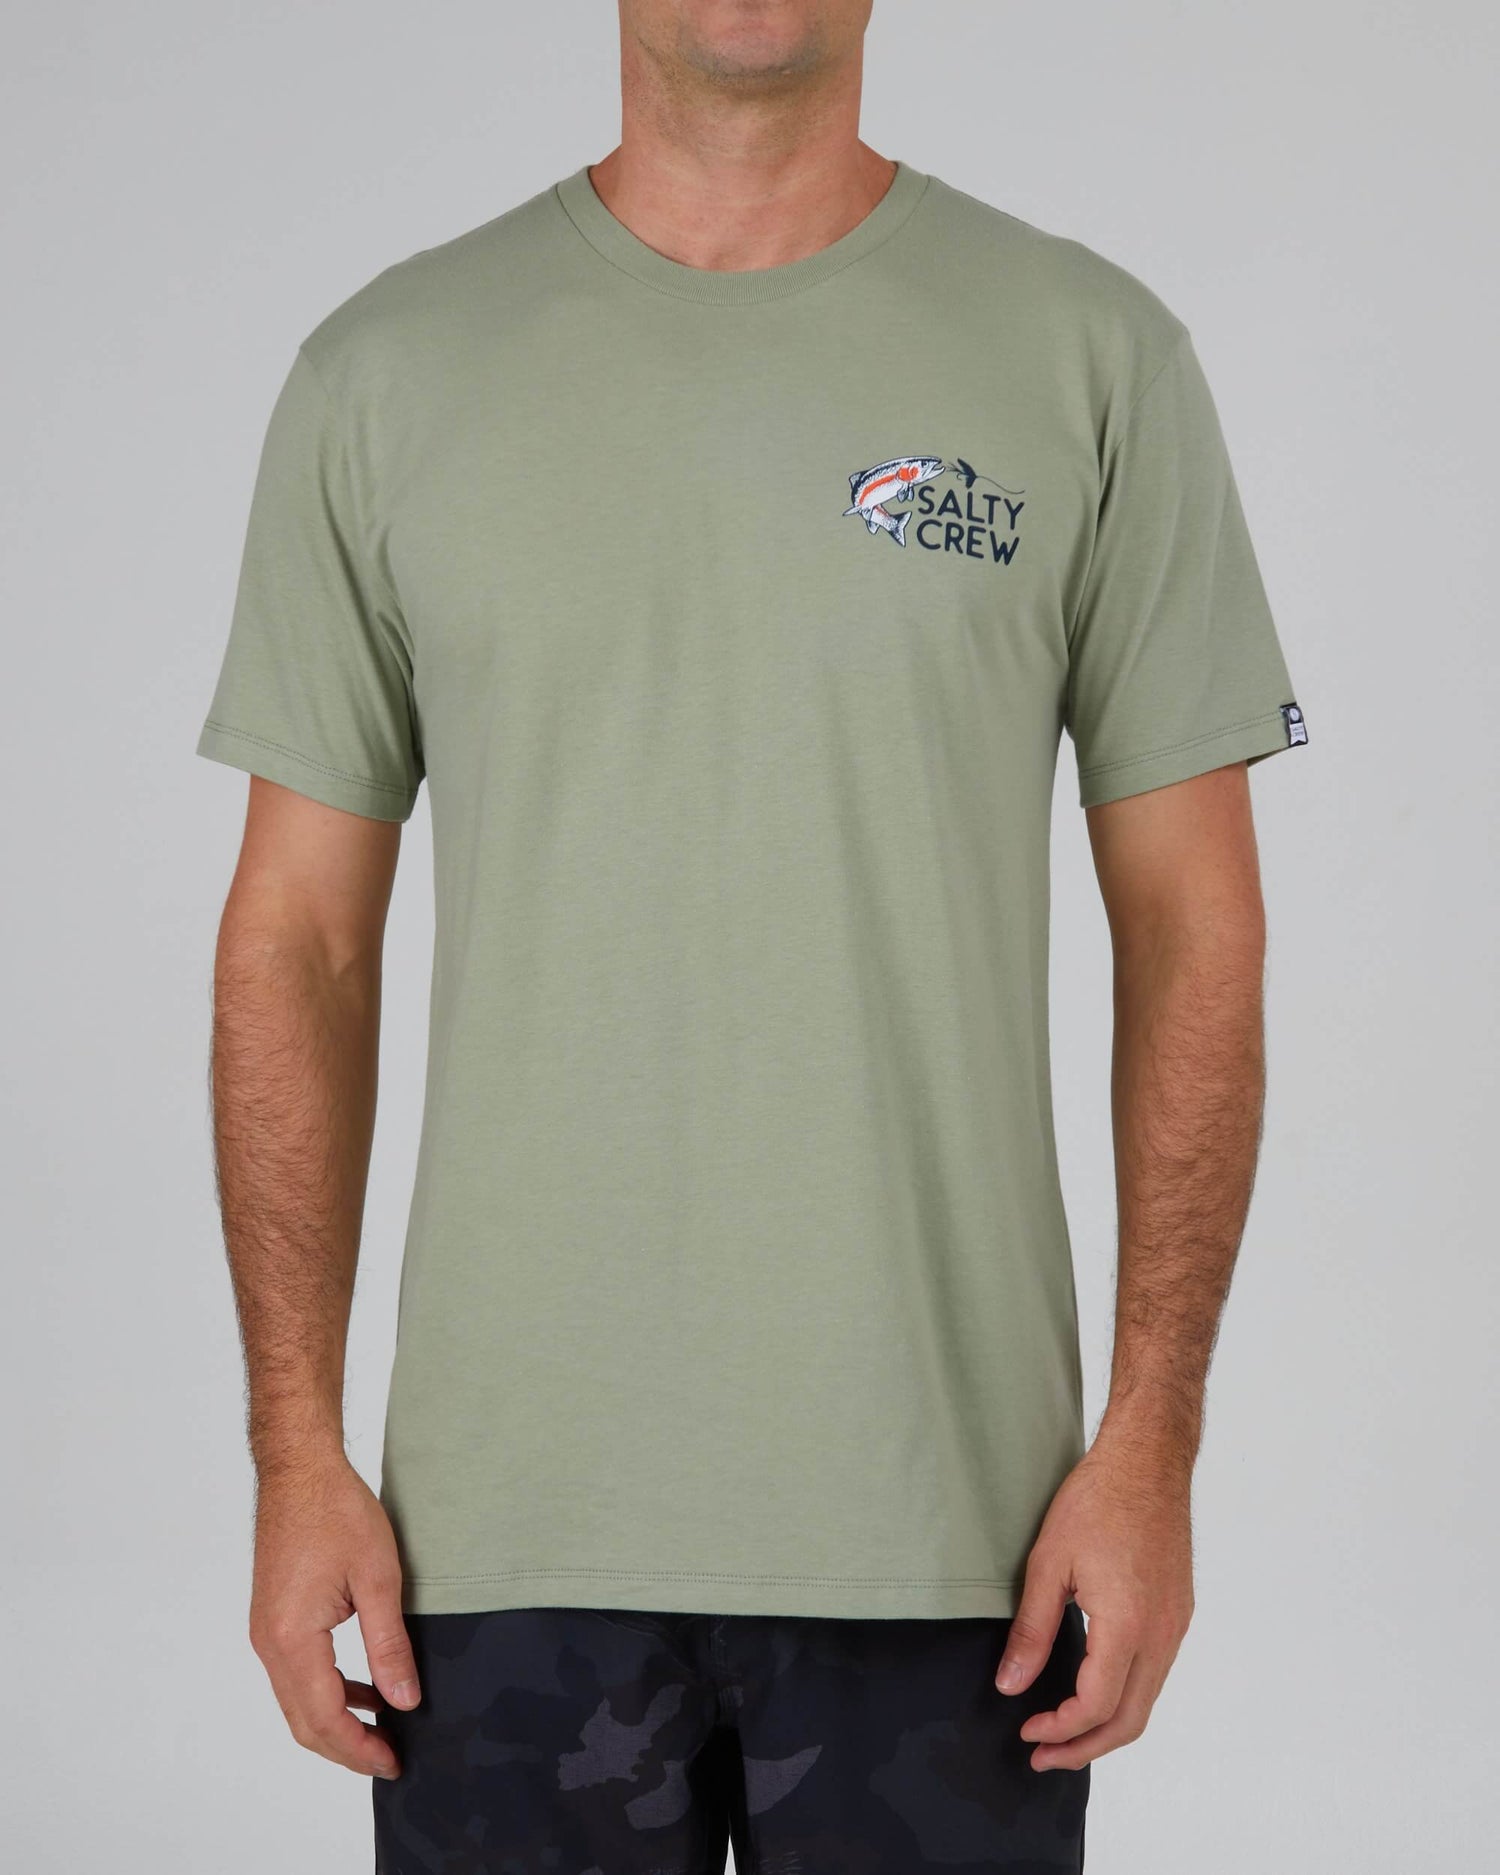 Salty crew T-SHIRTS S/S Fly Trap Premium S/S Tee - Dusty Sage in Dusty Sage